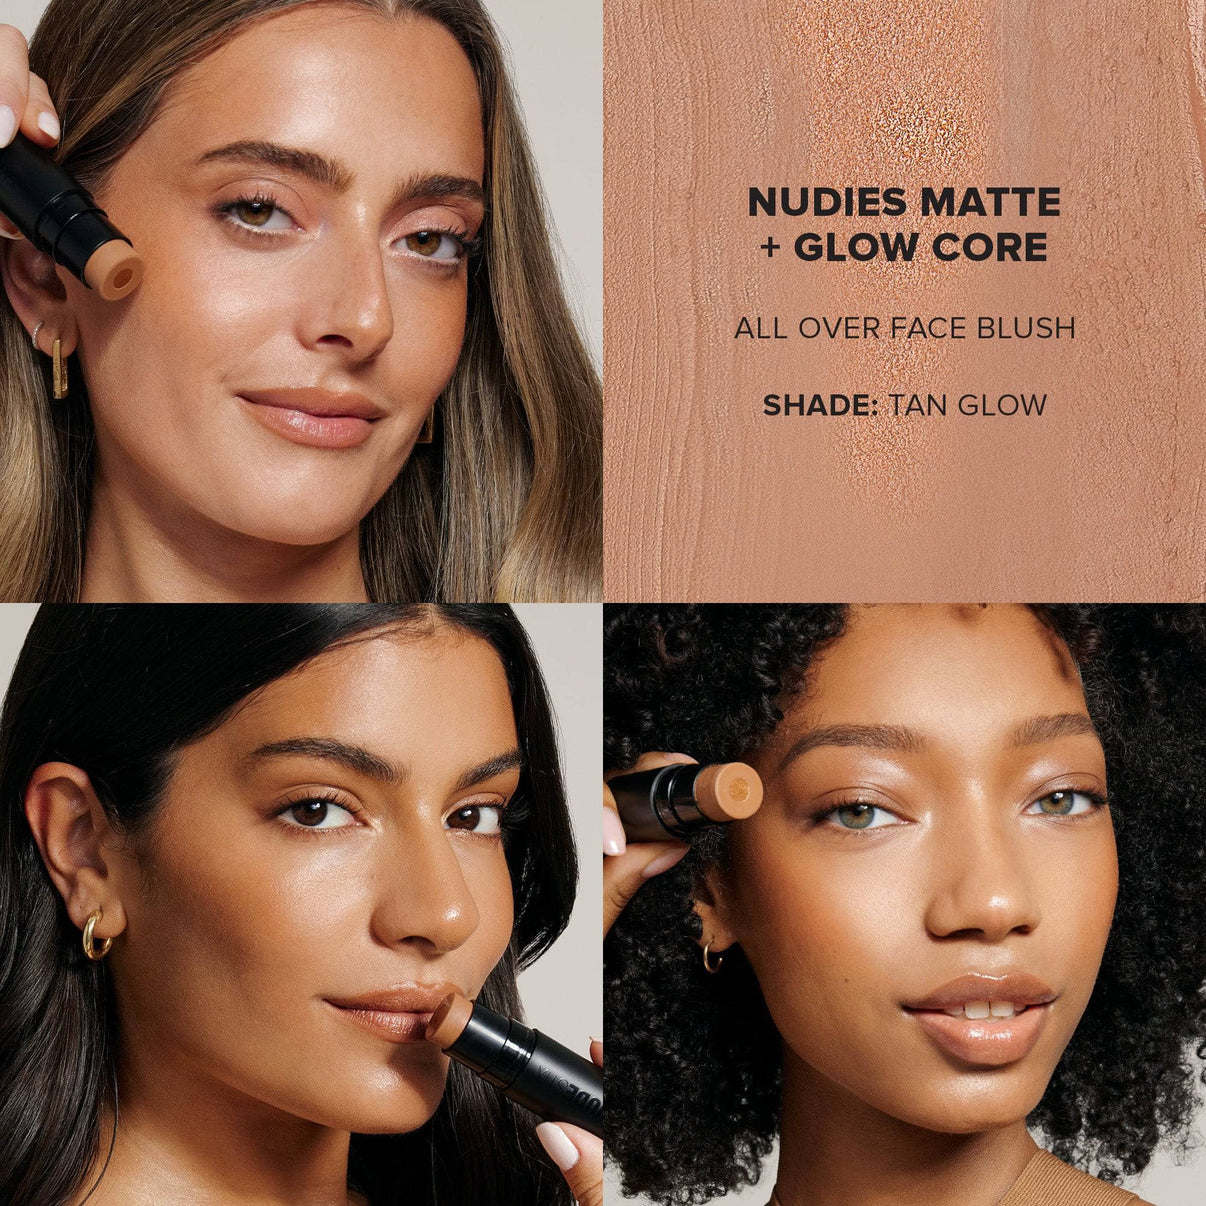 Grid with models wearing tan glow from The Ultimate Blush & Glow Set